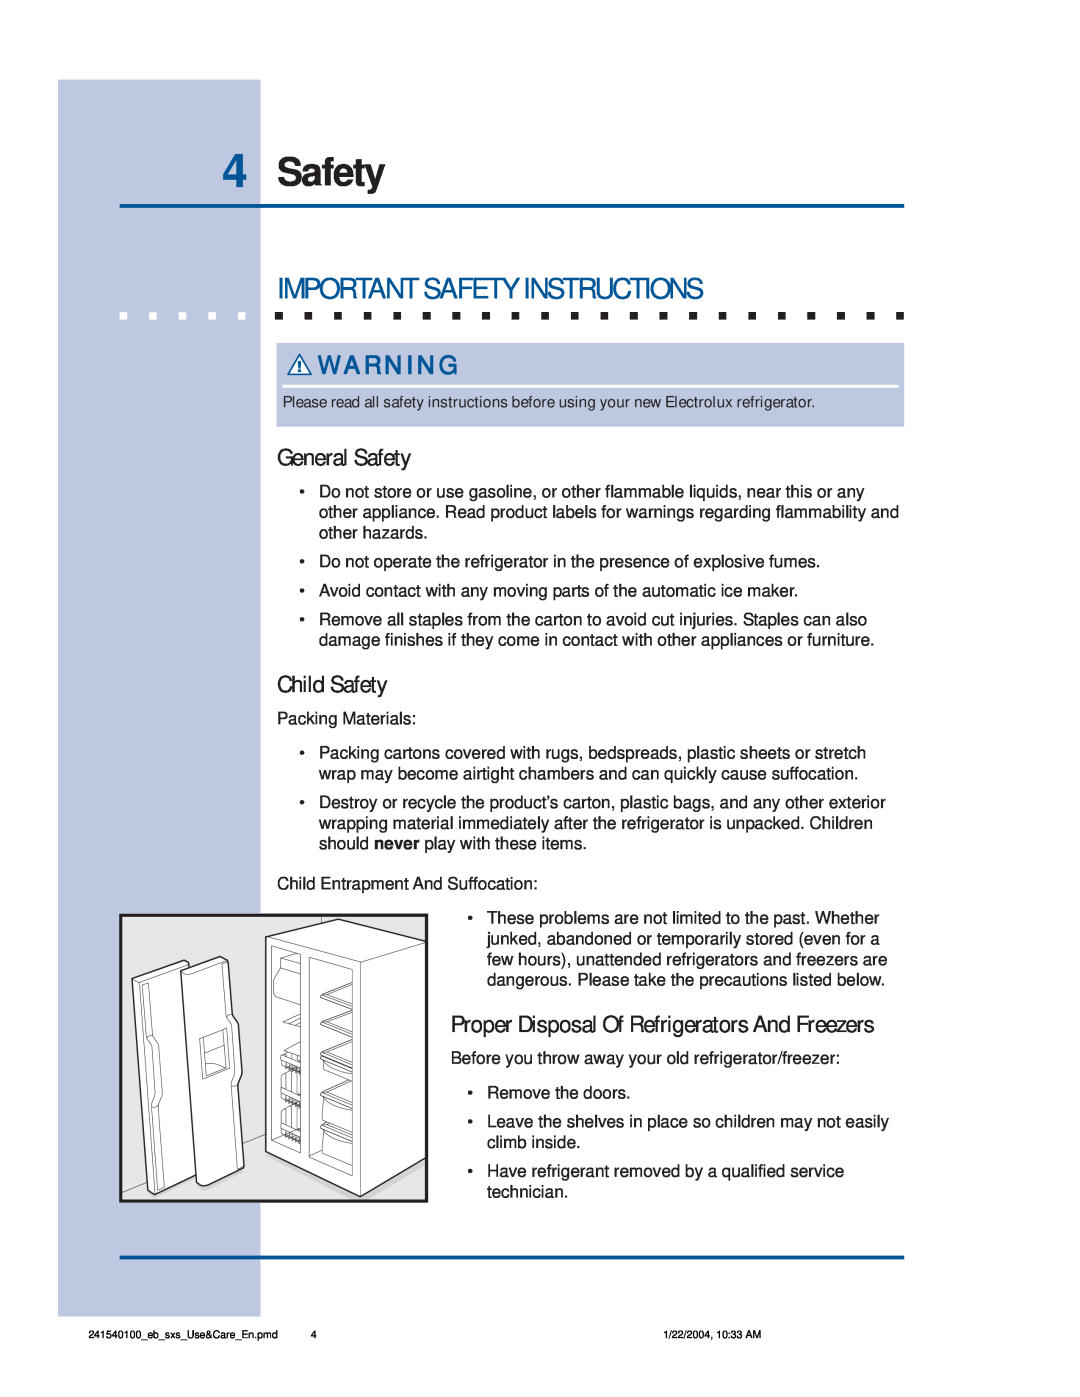 Frigidaire 241540100 (1203) manual 4Safety, Important Safety Instructions, General Safety, Child Safety 